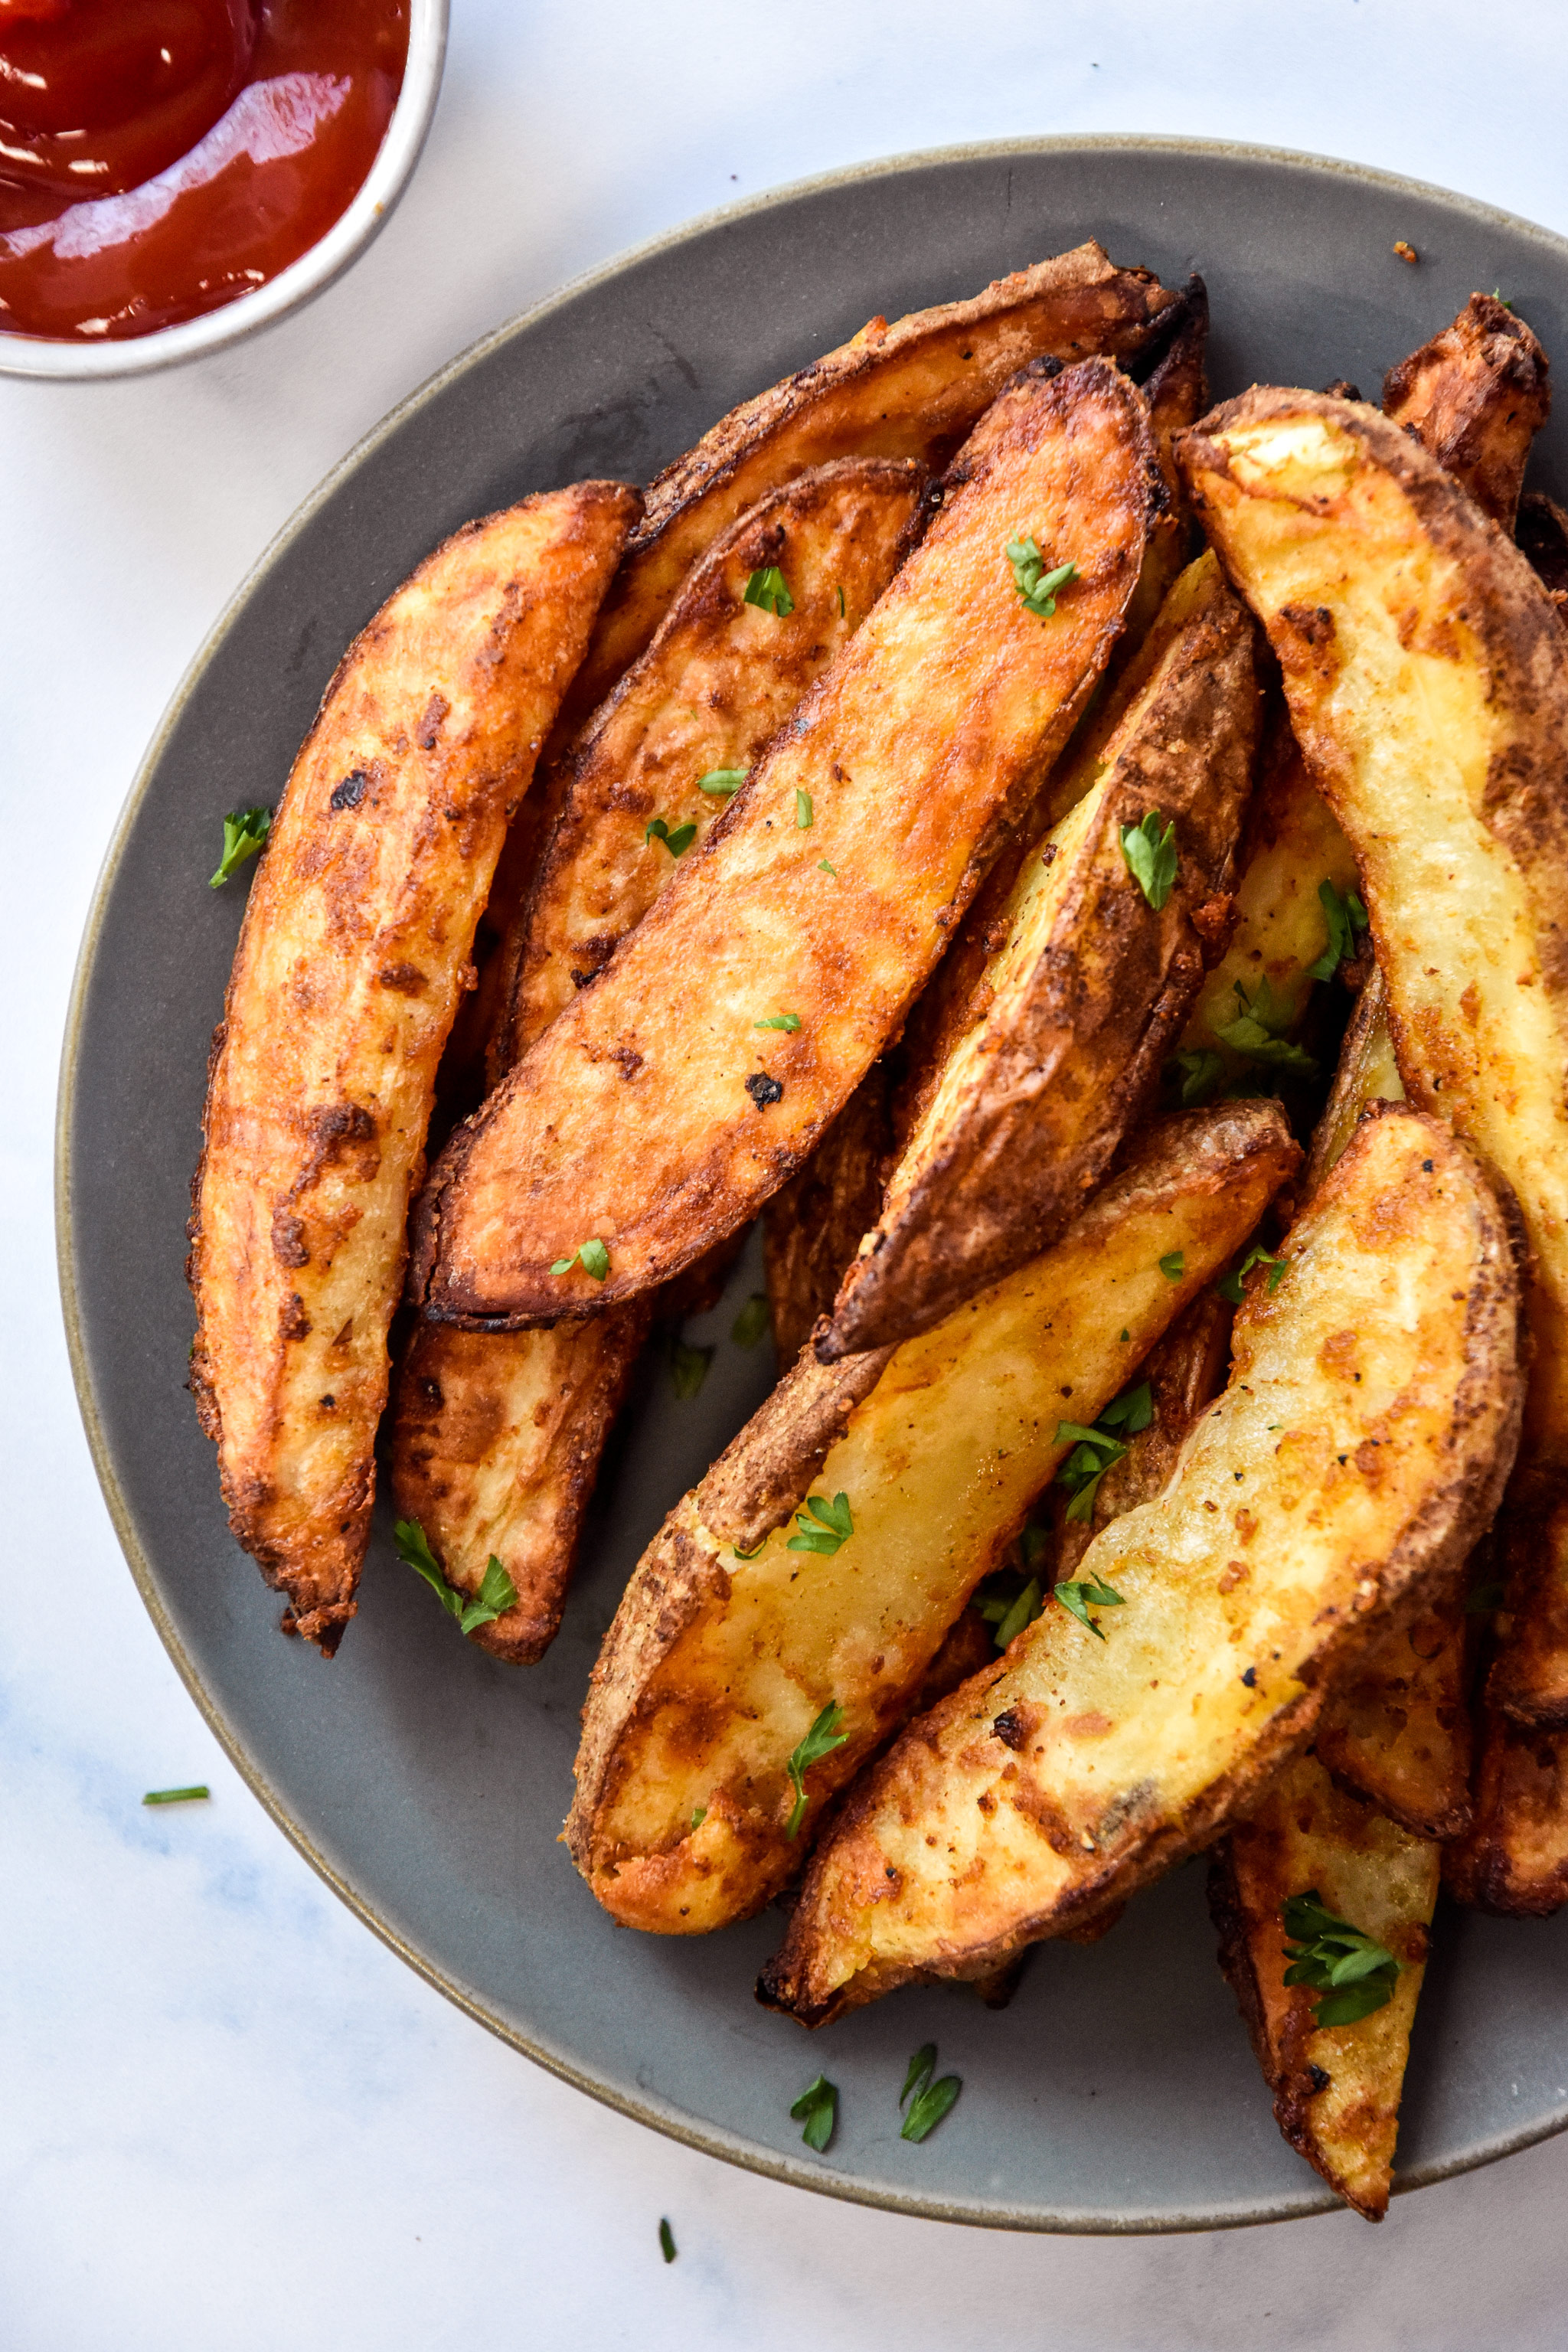 air fryer jojo potato wedges on a plate with parsley sprinkled on top.